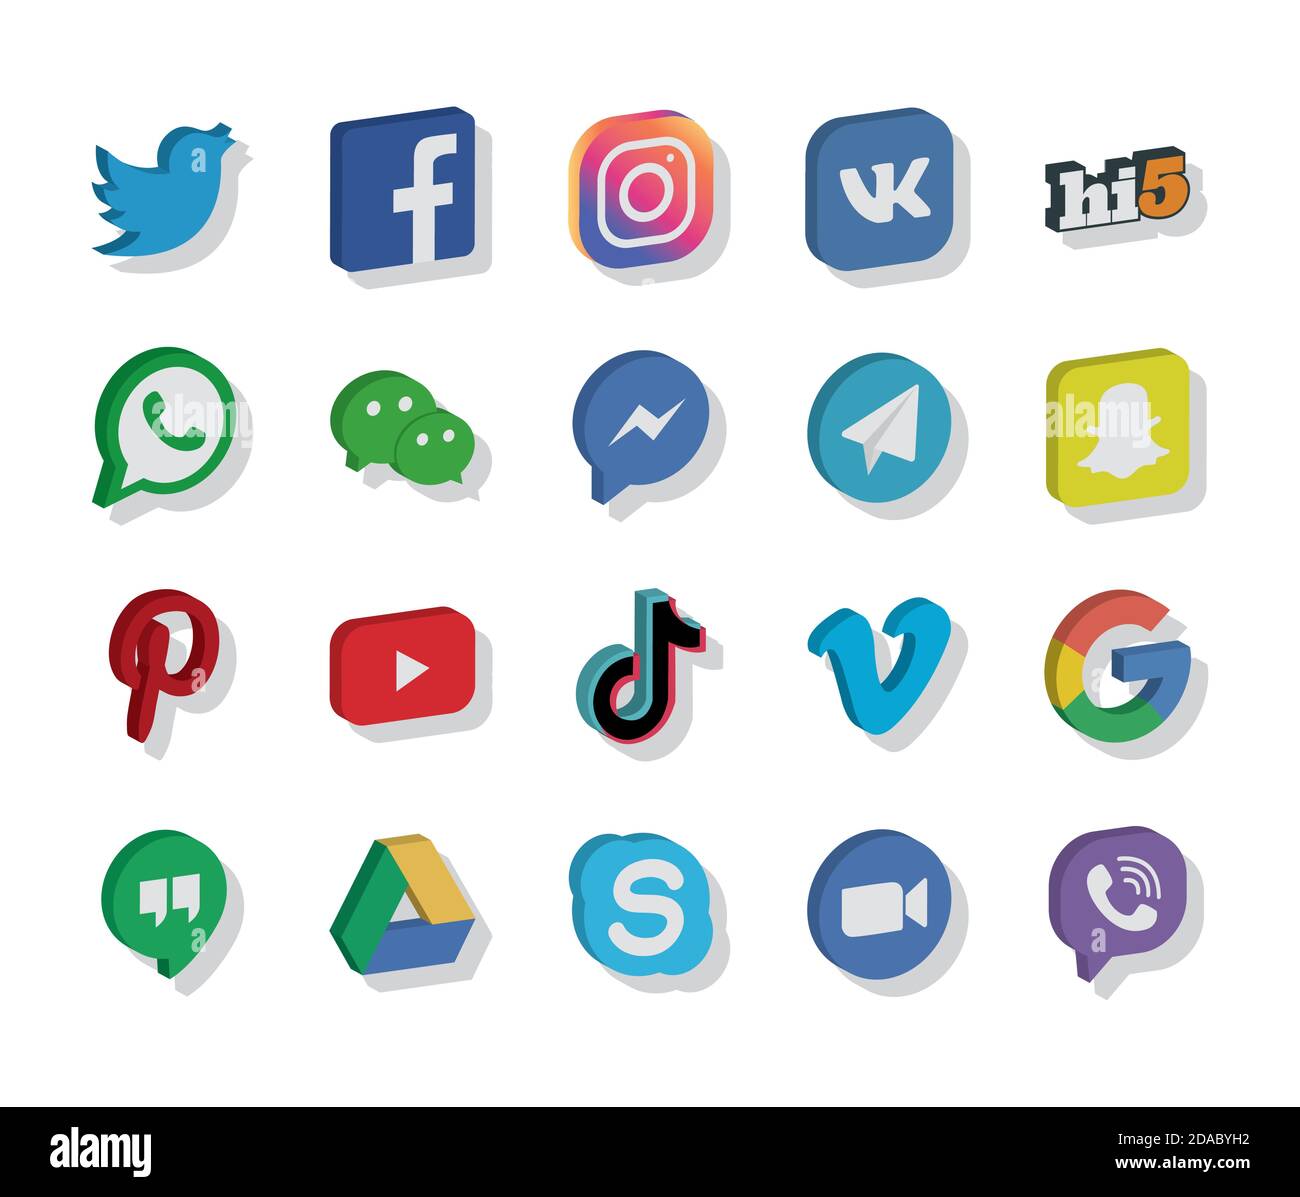 social networks and instant messaging logo icon set over white background, isometric style, vector illustration Stock Vector